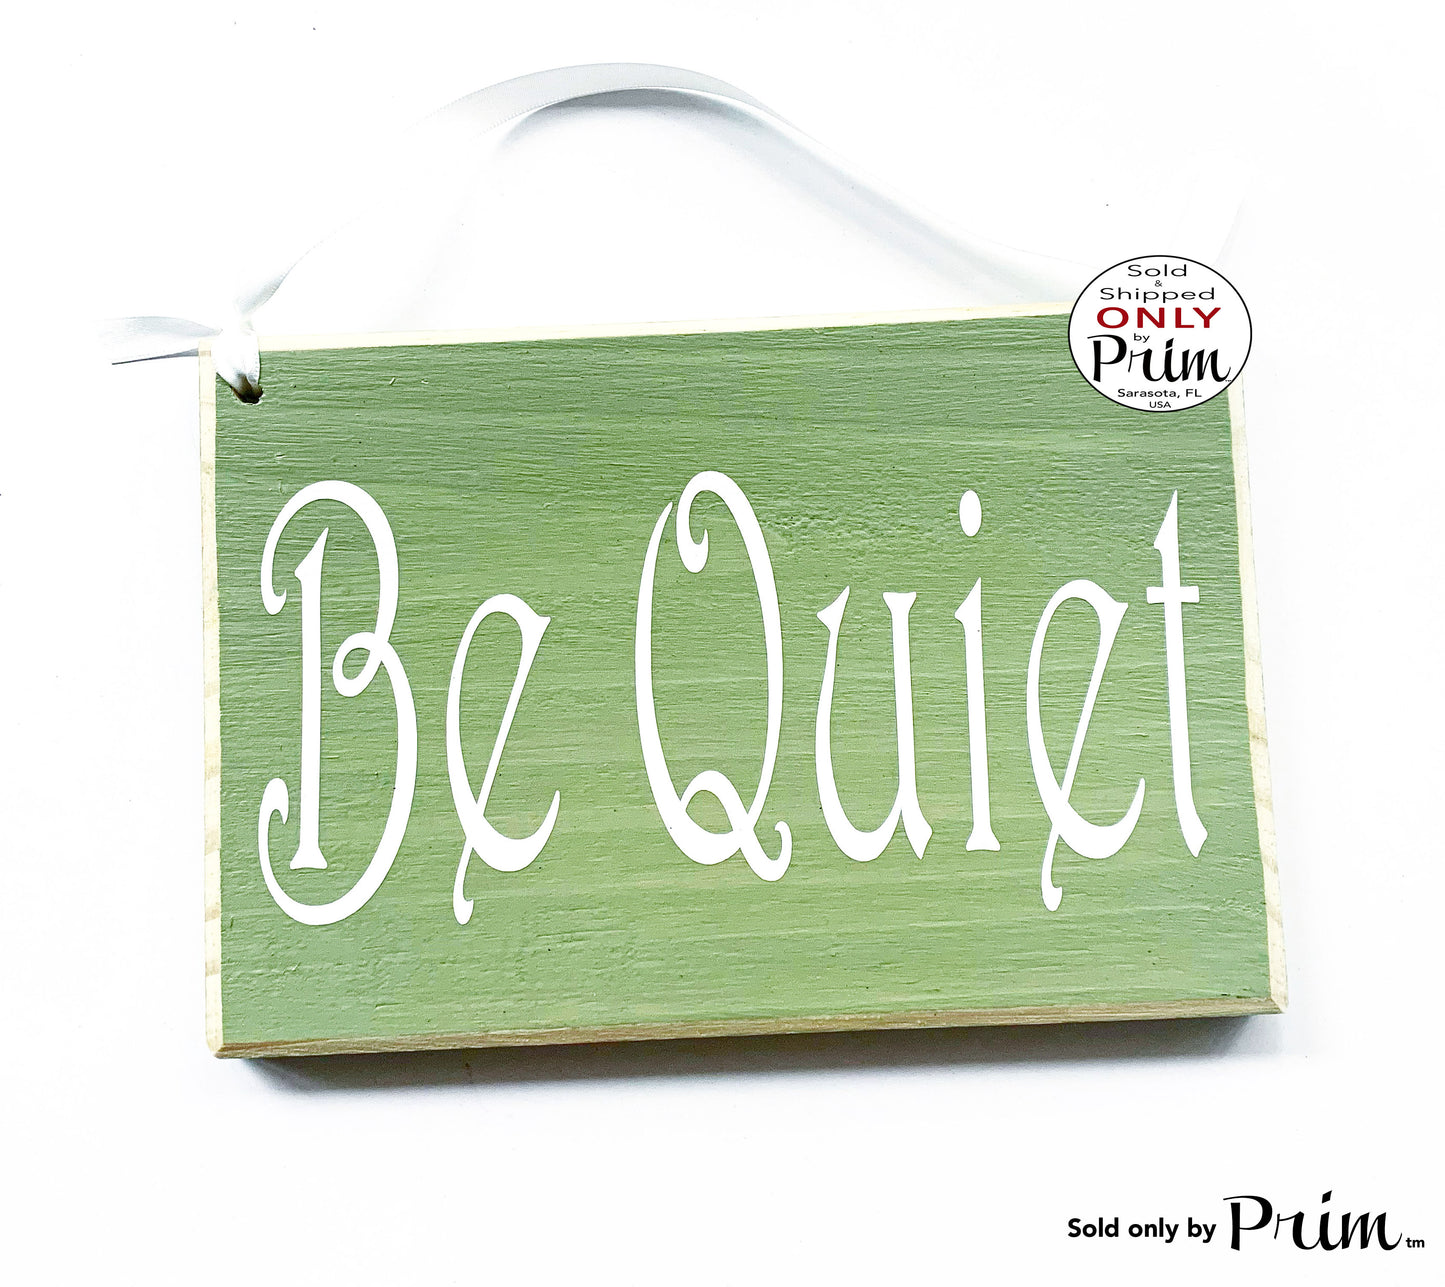 8x6 Be Quiet Custom Wood Sign In Progress Please Do Not Disturb The Zone Welcome In Session Progress Conference Office Workspace Door Plaque